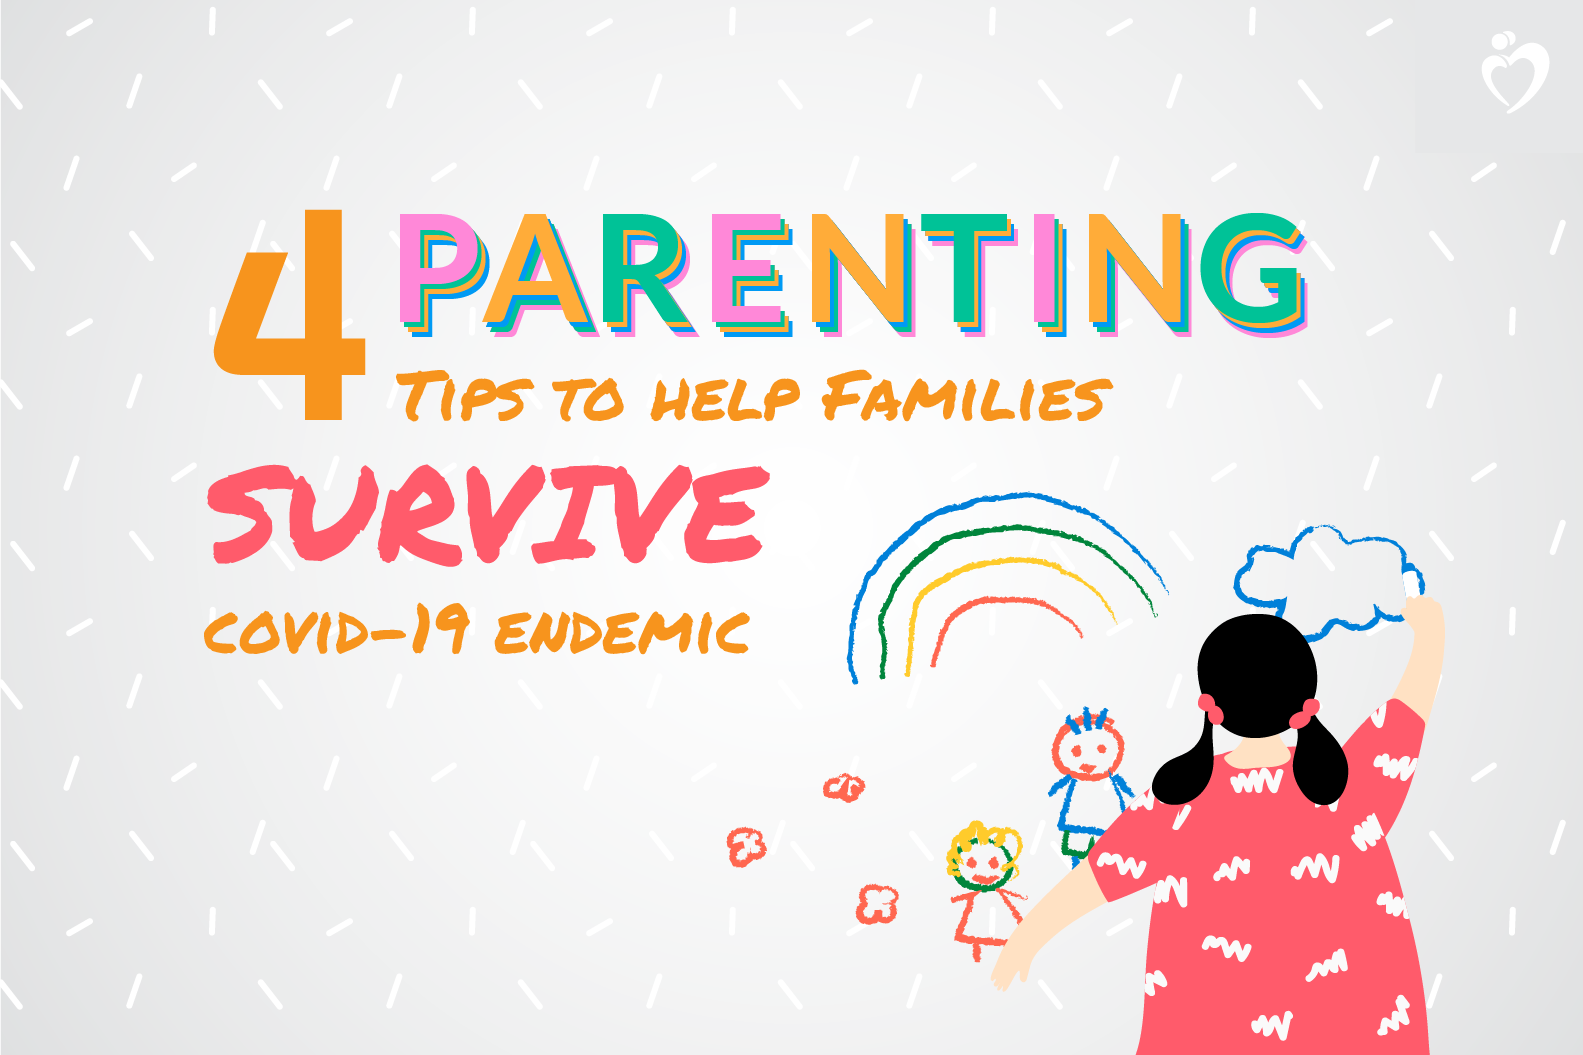 4 Parenting Tips to help Families Survive Covid-19 Endemic